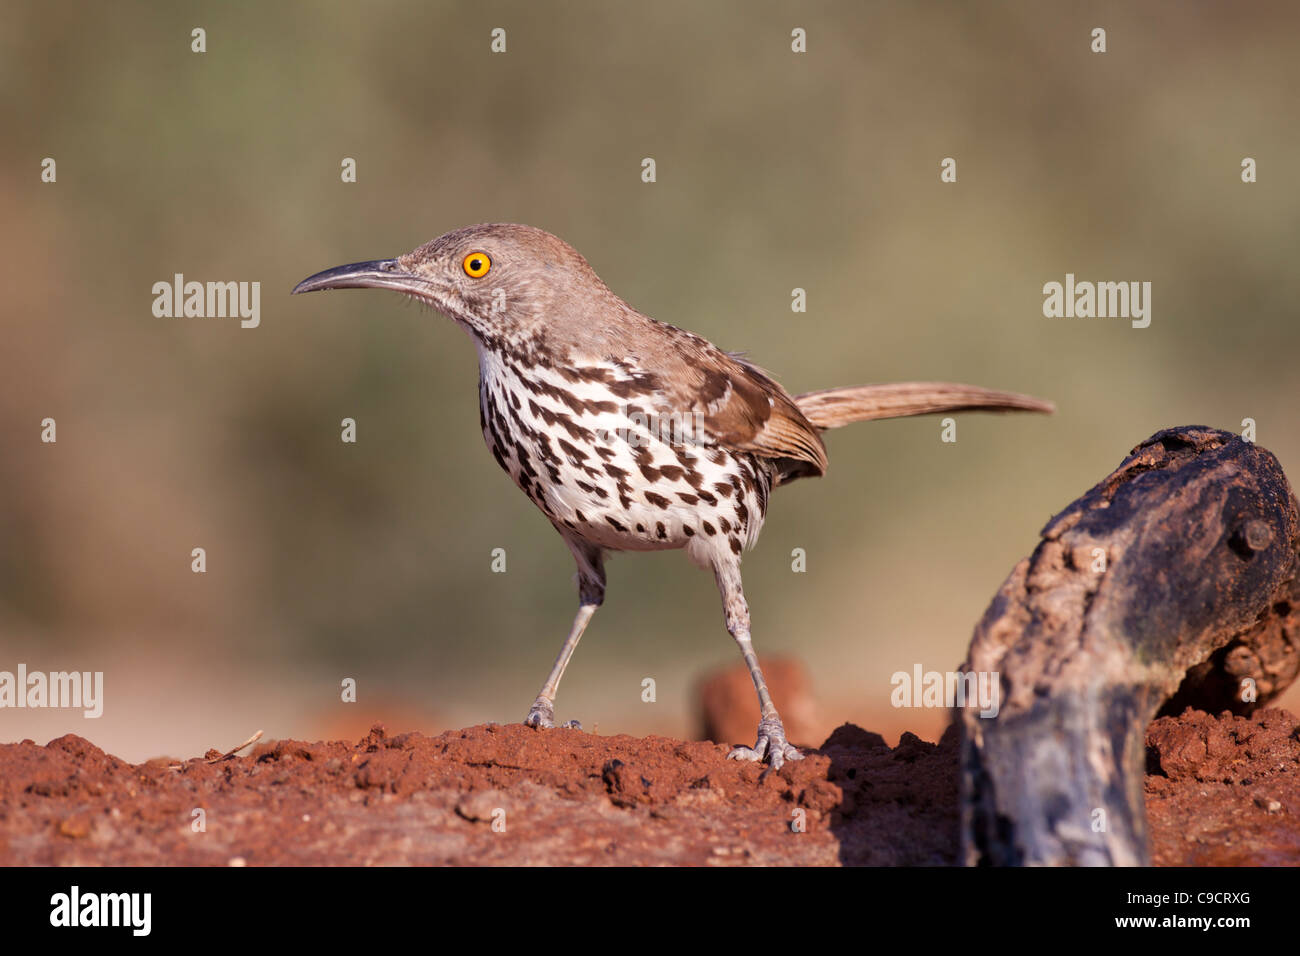 Long-billed Thrasher, Toxostoma longirostre, looking for water and relief from summer heat on a ranch in South Texas. Stock Photo